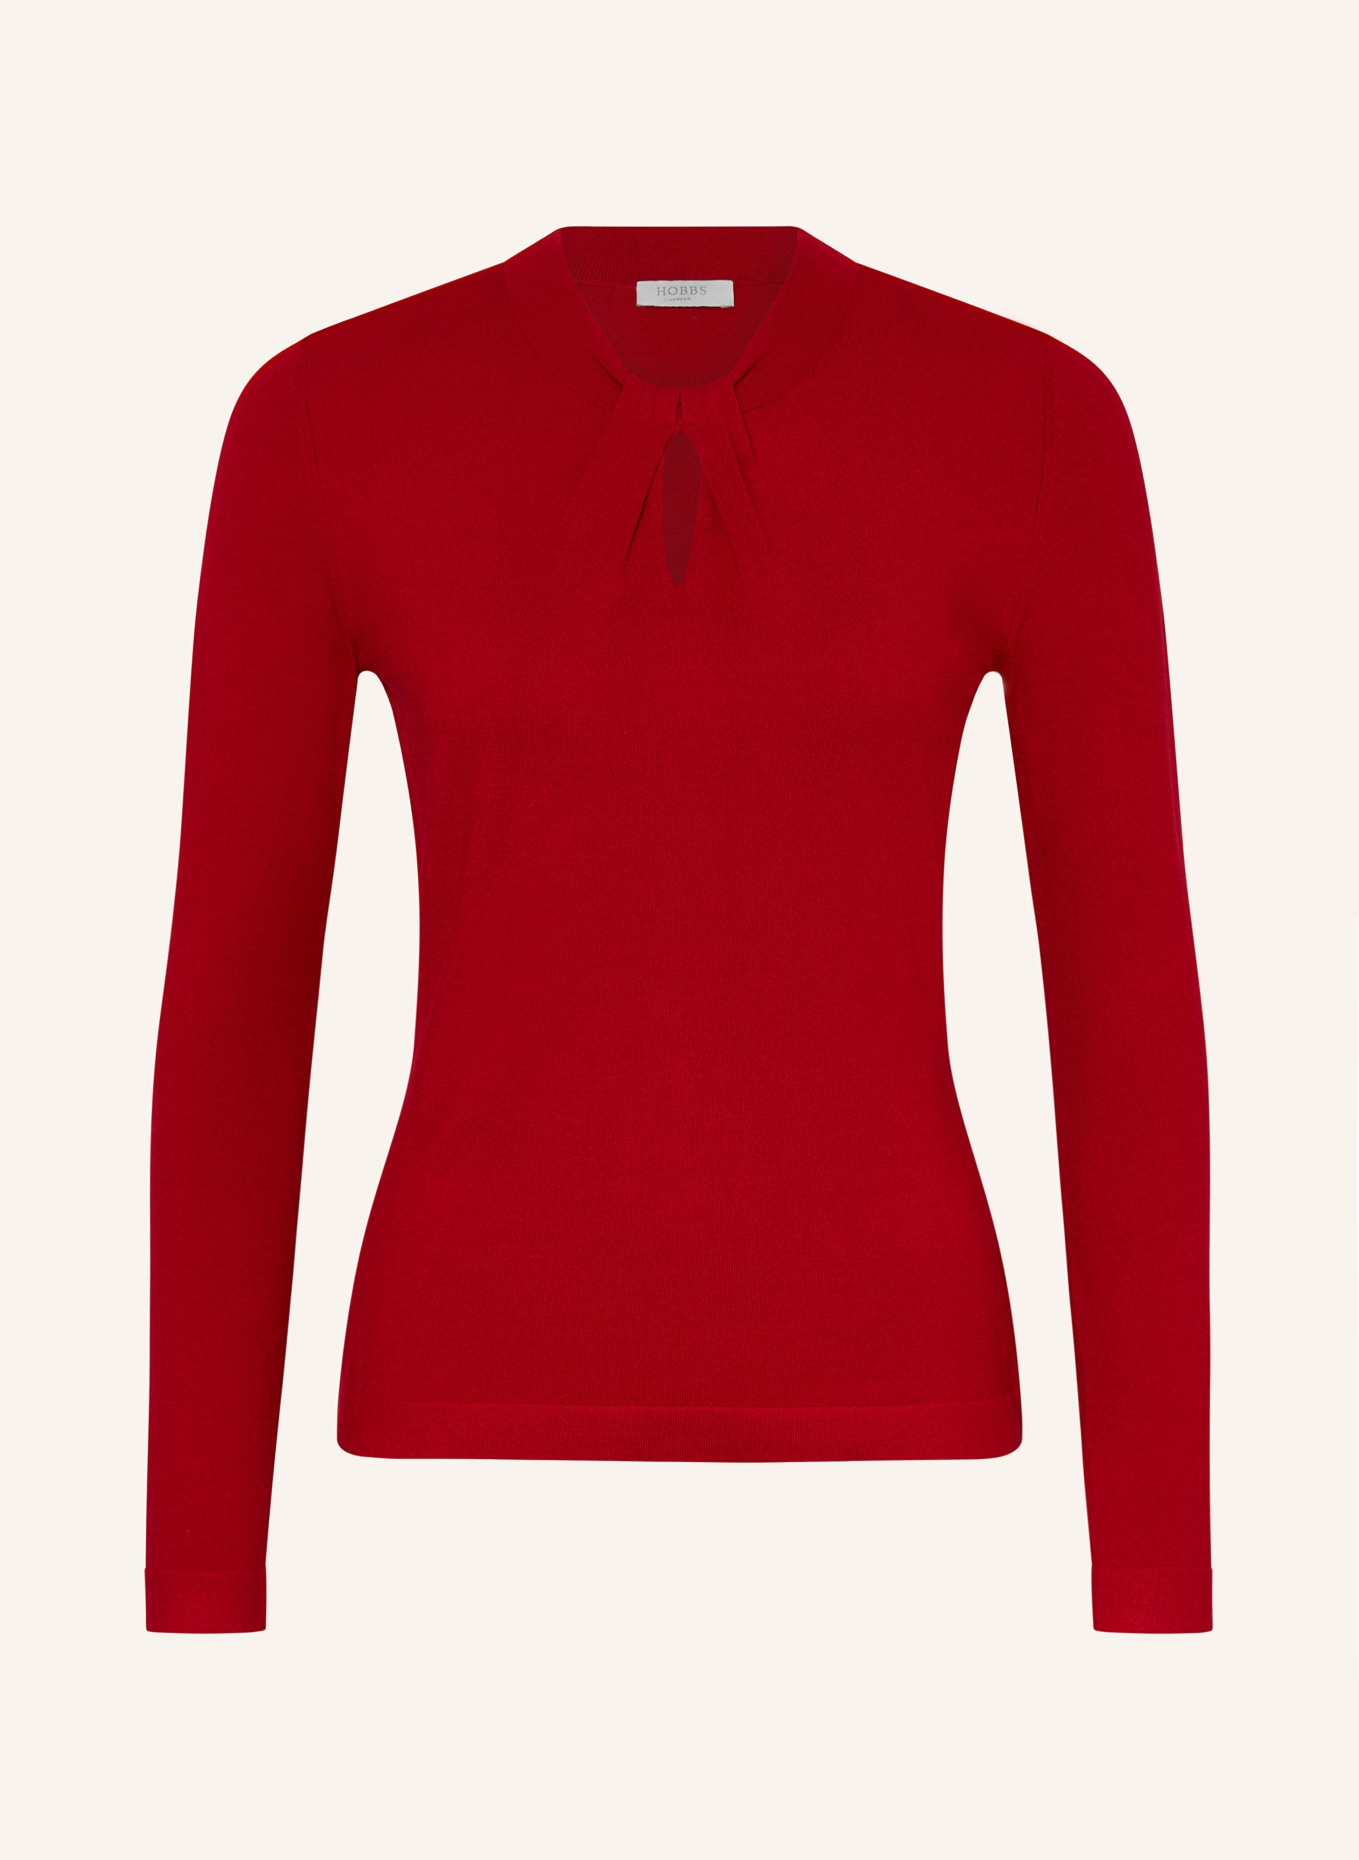 HOBBS Sweater EFFIE with cut-out, Color: RED (Image 1)